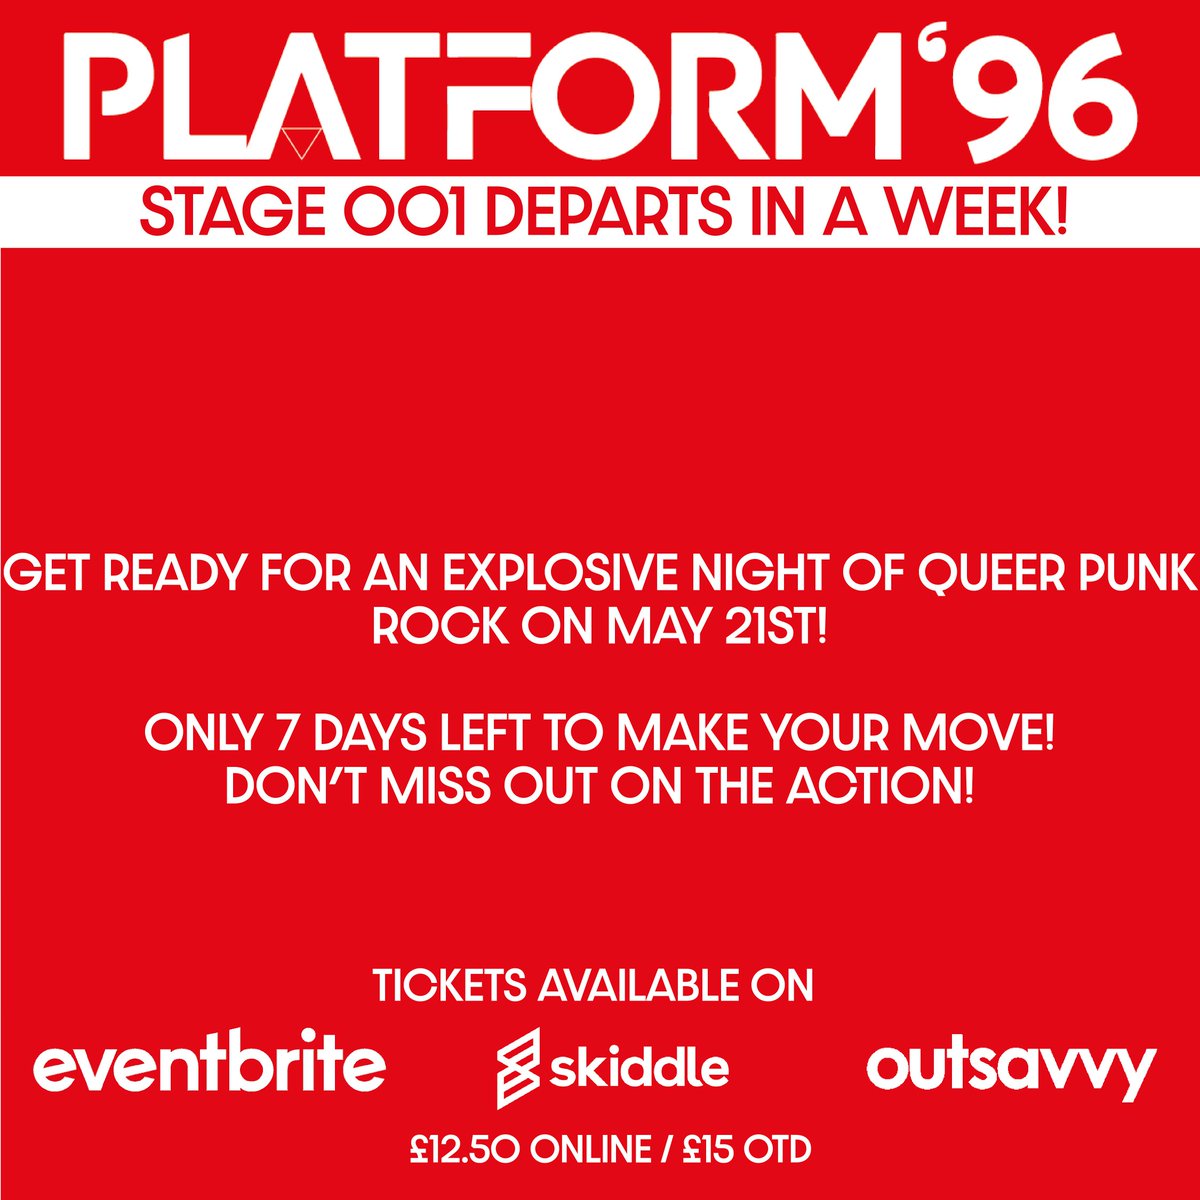 Feeling those post Eurovision blues? We've got you covered with your next gig 😉
You have exactly one week to make your move! Grab your tickets before it's too late!
#lgbtcommunity #lgbtartist #lgbtlondon #punkrock #londongig #londongigs

platform96-stage001.eventbrite.co.uk